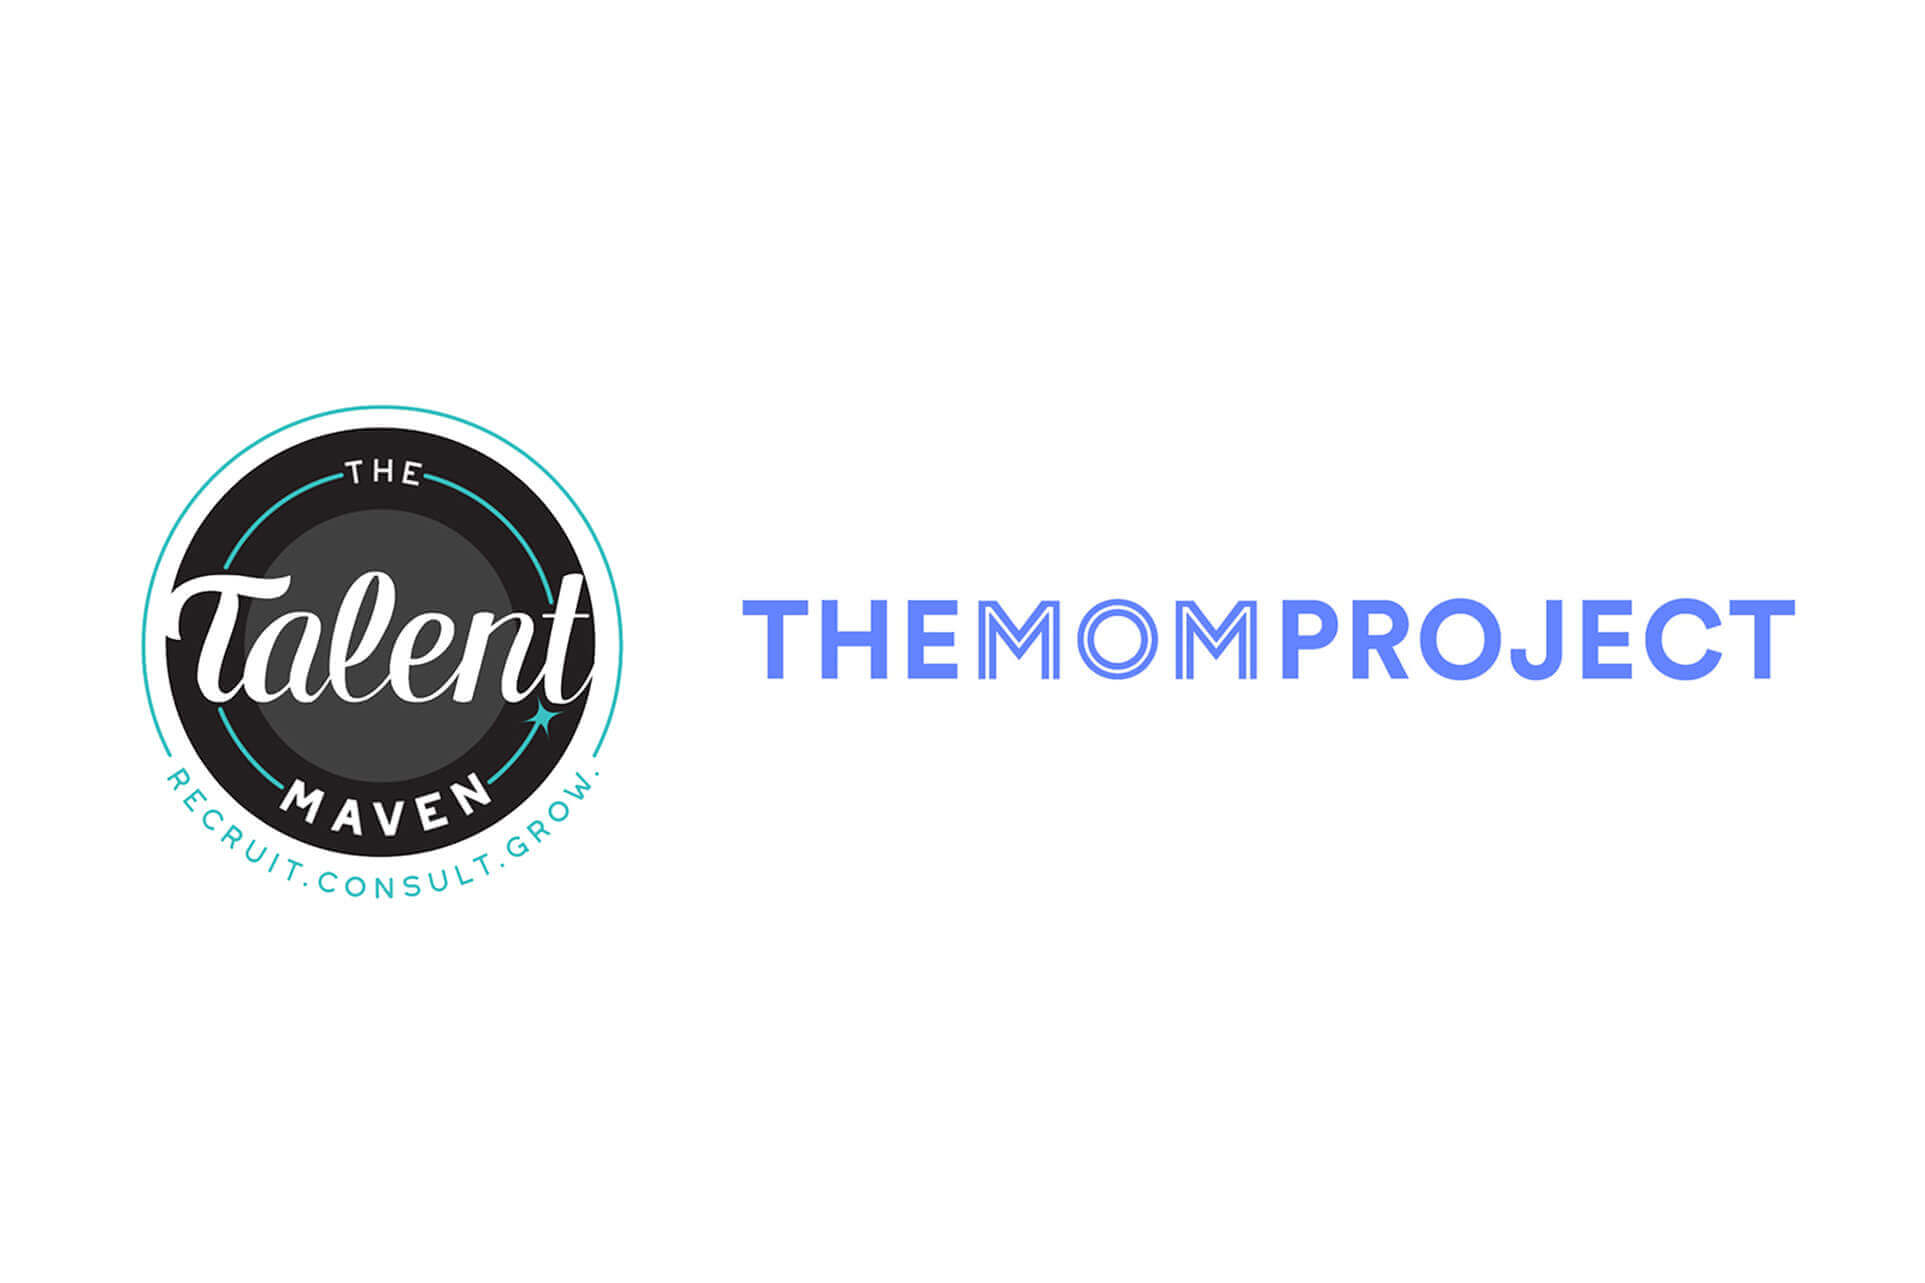 The Talent Maven: The Mom Project